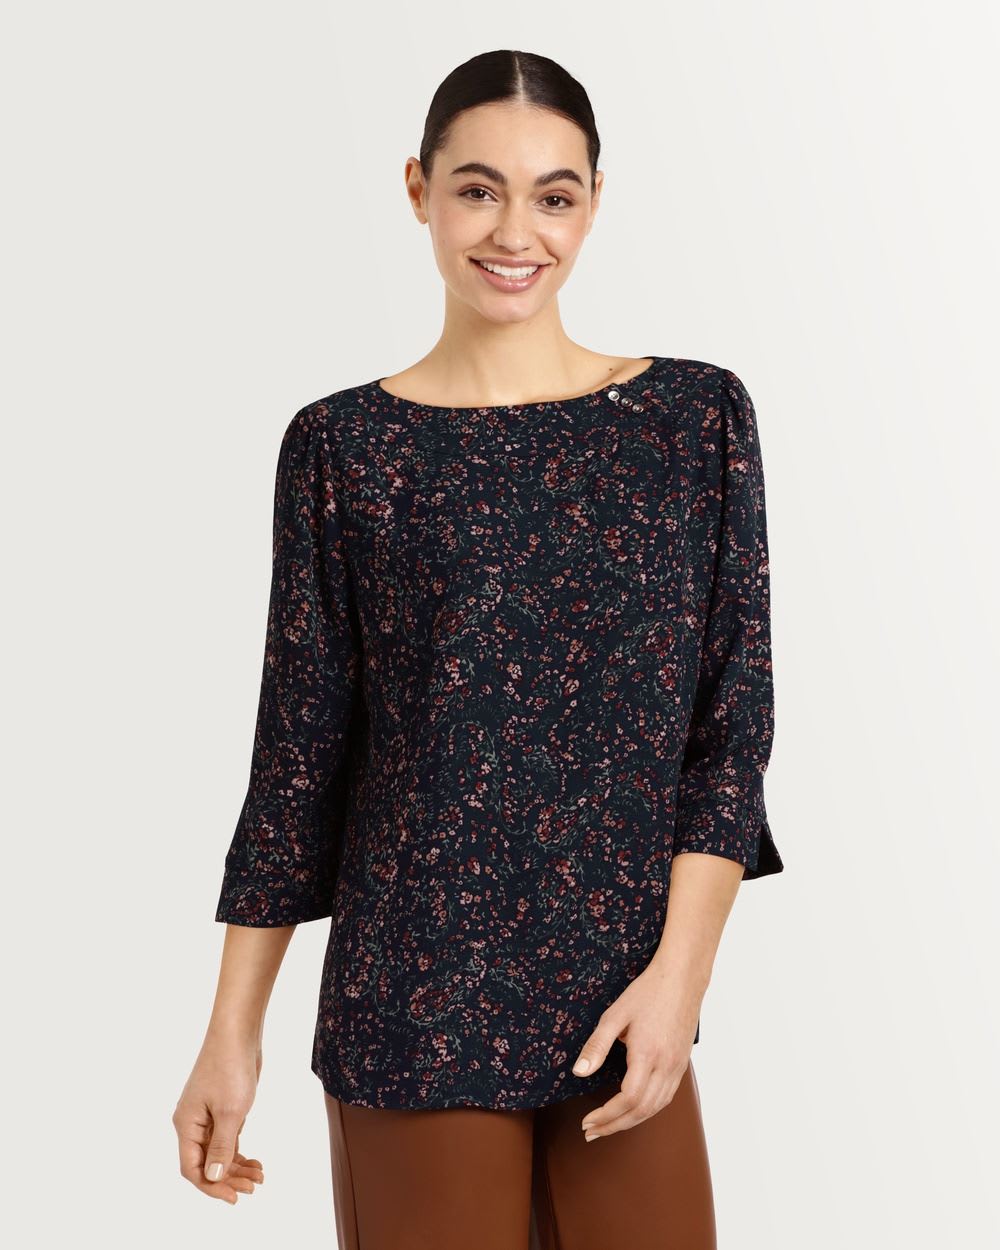 Printed ¾ Sleeve Boat Neck Blouse